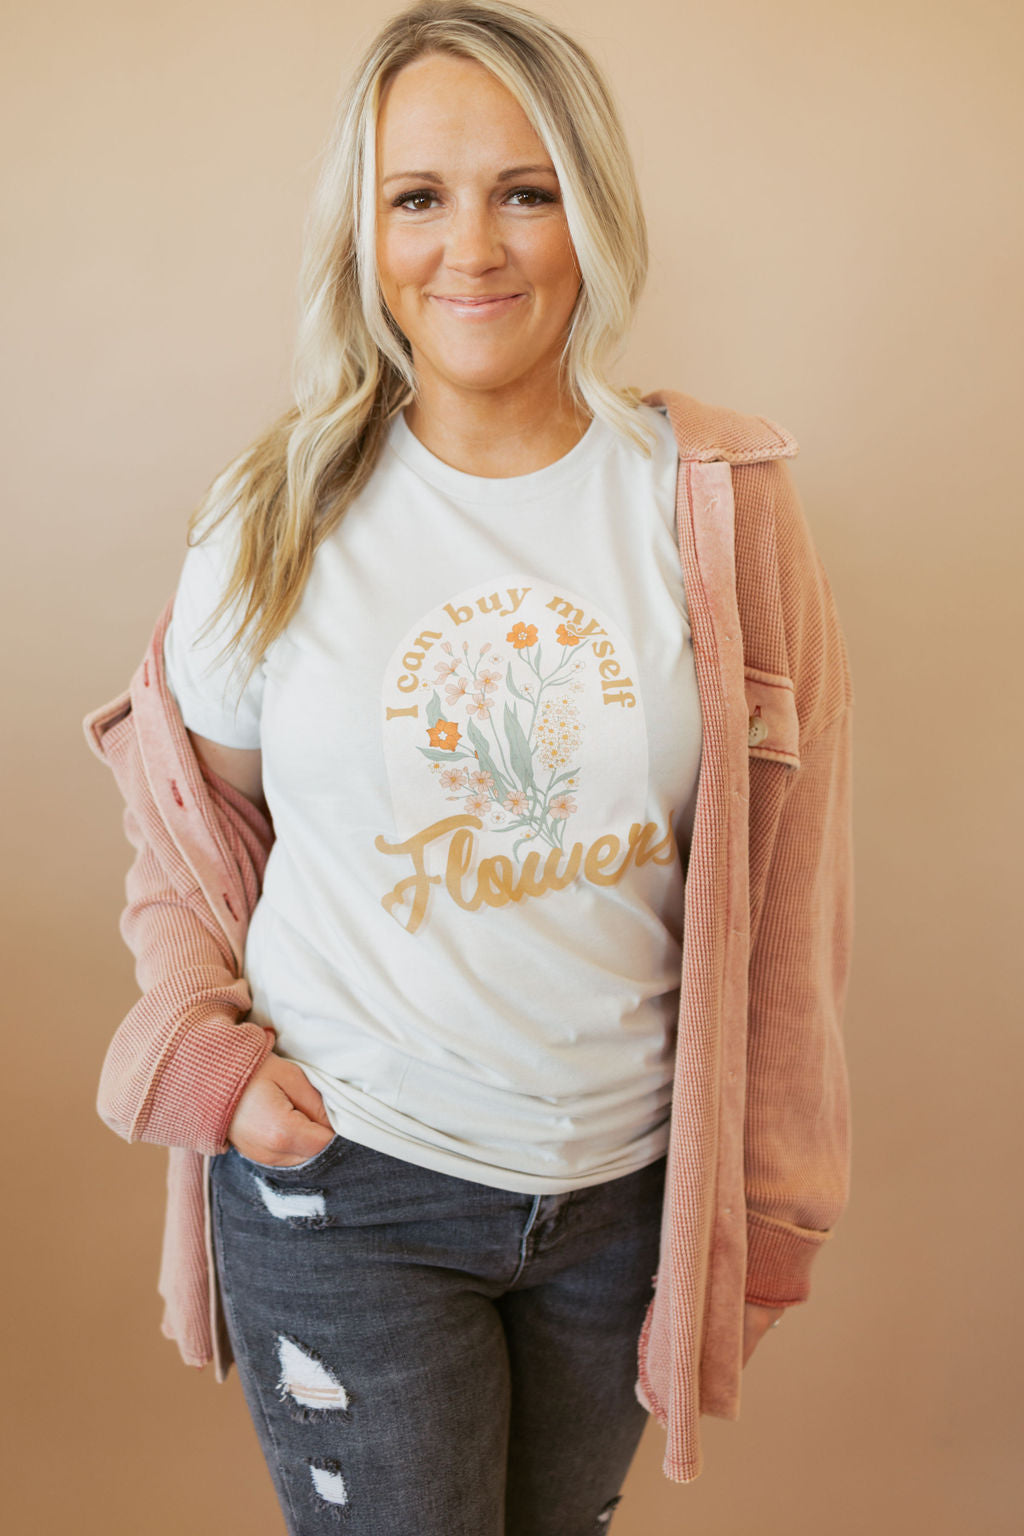 I Can Buy Myself Flowers | Tee | Adult-Sister Shirts-Sister Shirts, Cute & Custom Tees for Mama & Littles in Trussville, Alabama.